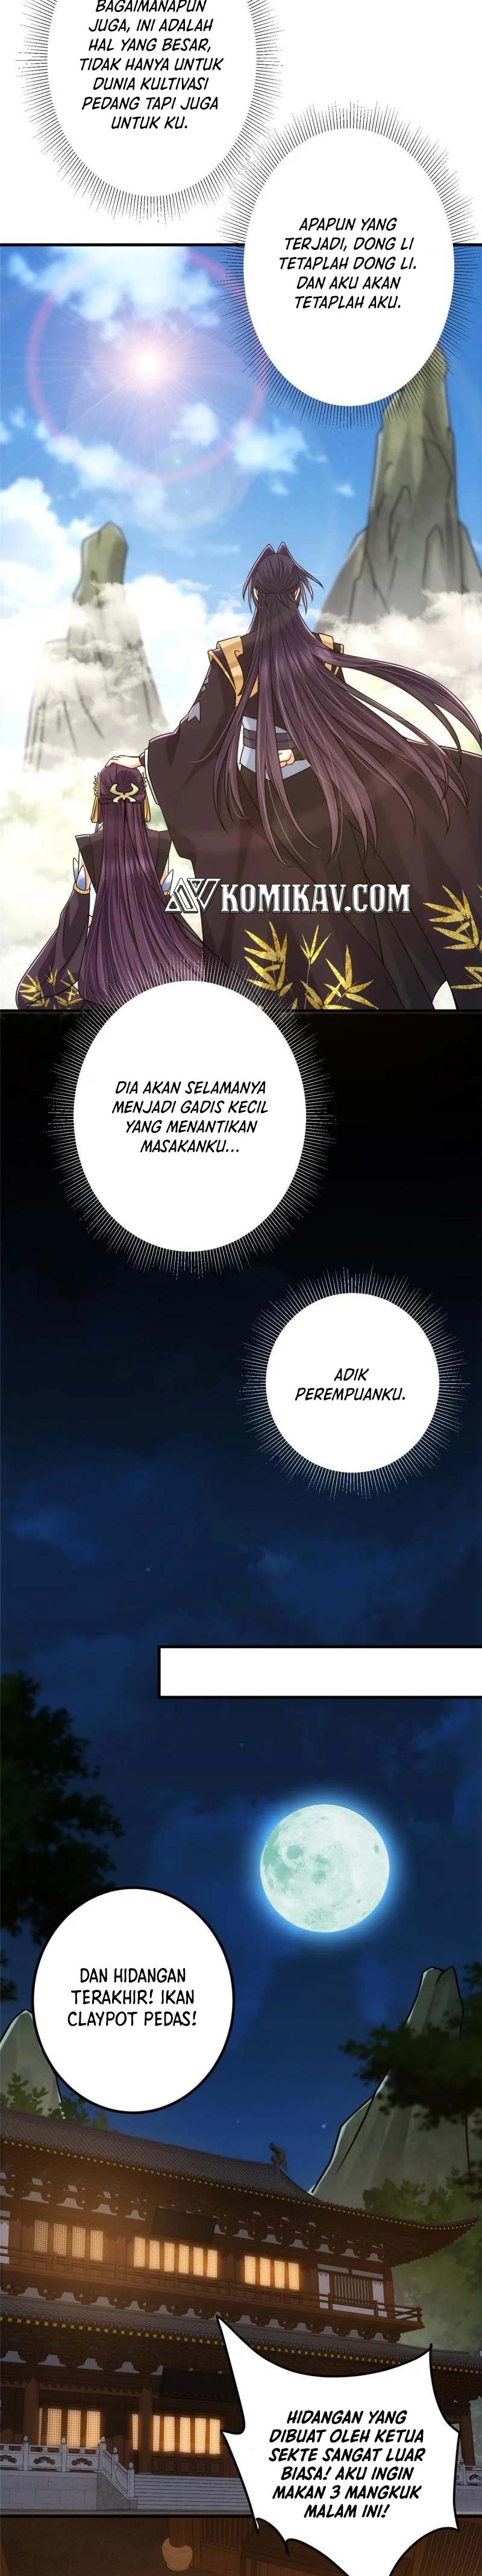 Keep A Low Profile, Sect Leader Chapter 129 Bahasa Indonesia